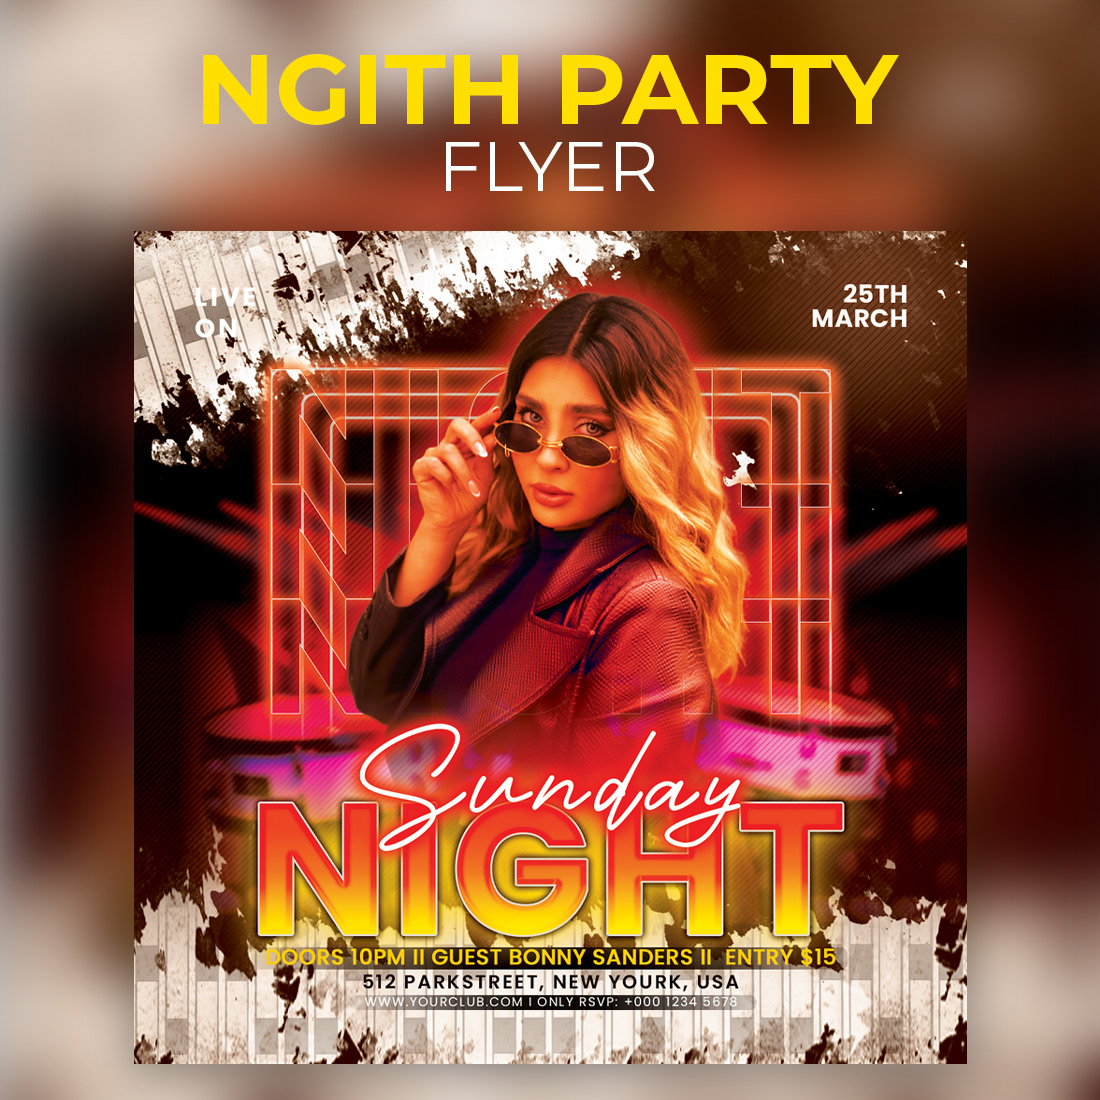 Night Party Flyer Template cover image.